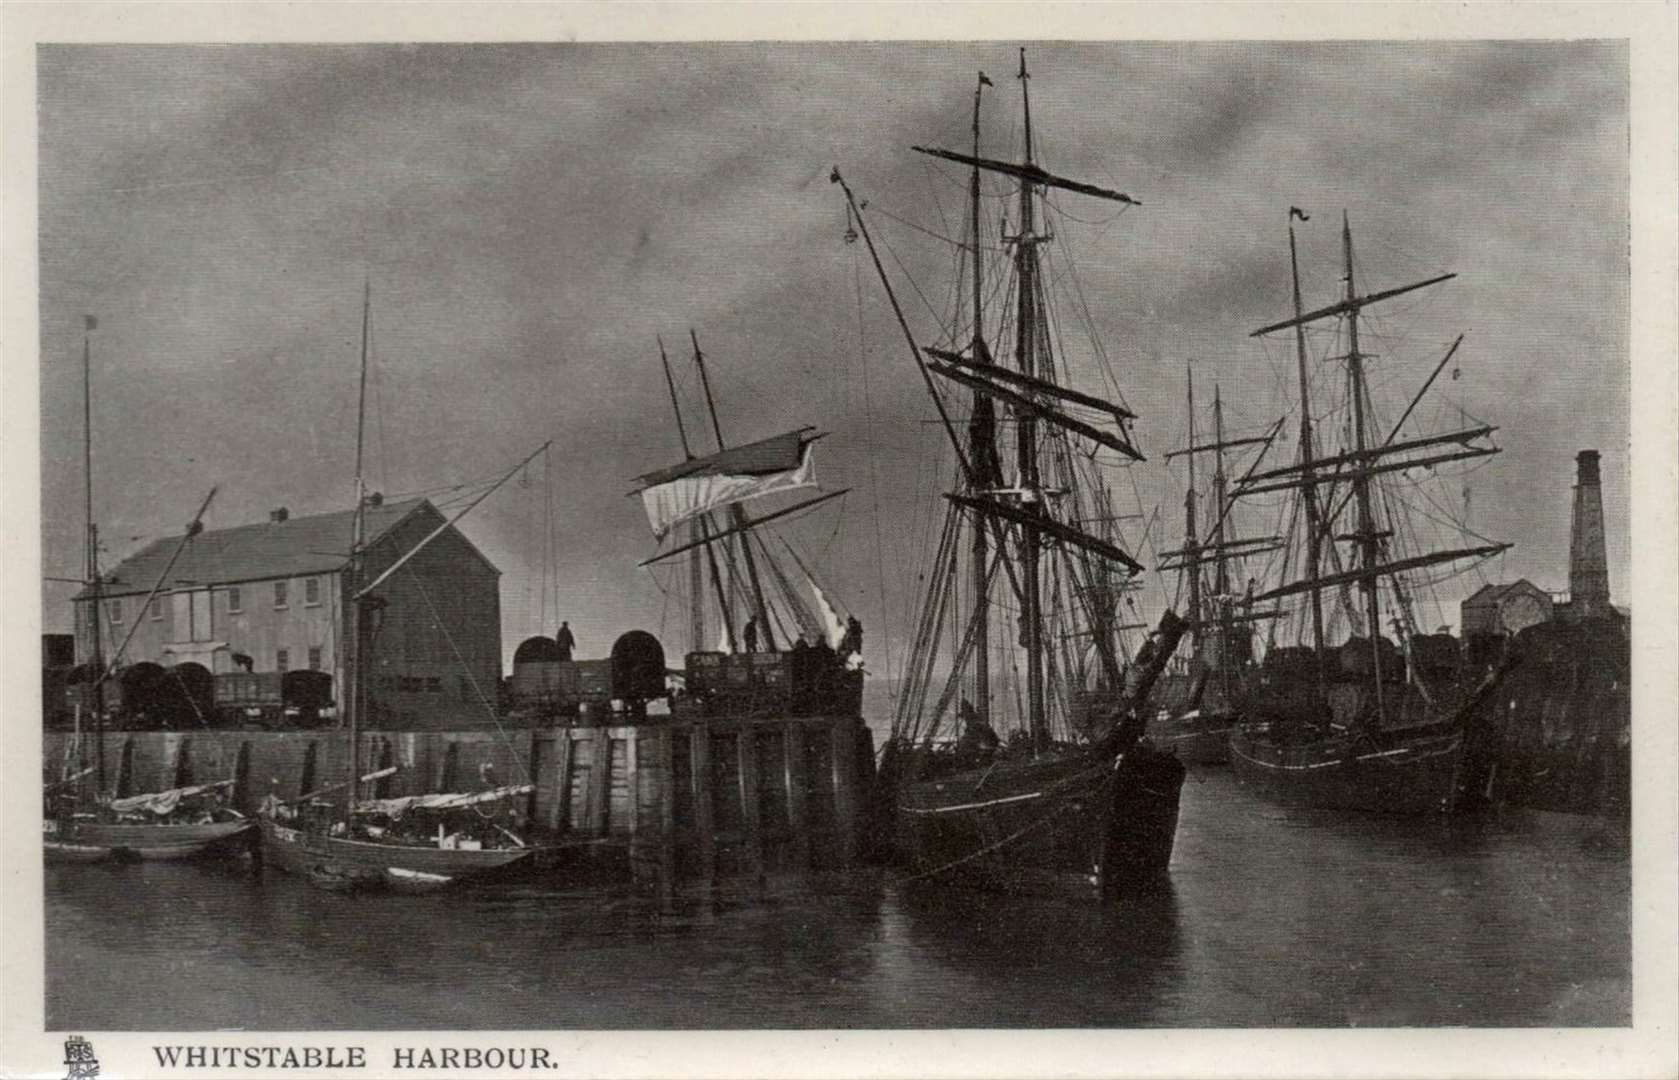 The old 'lighthouse' can be seen in the far right of this image. Credit: The Whitstable Society